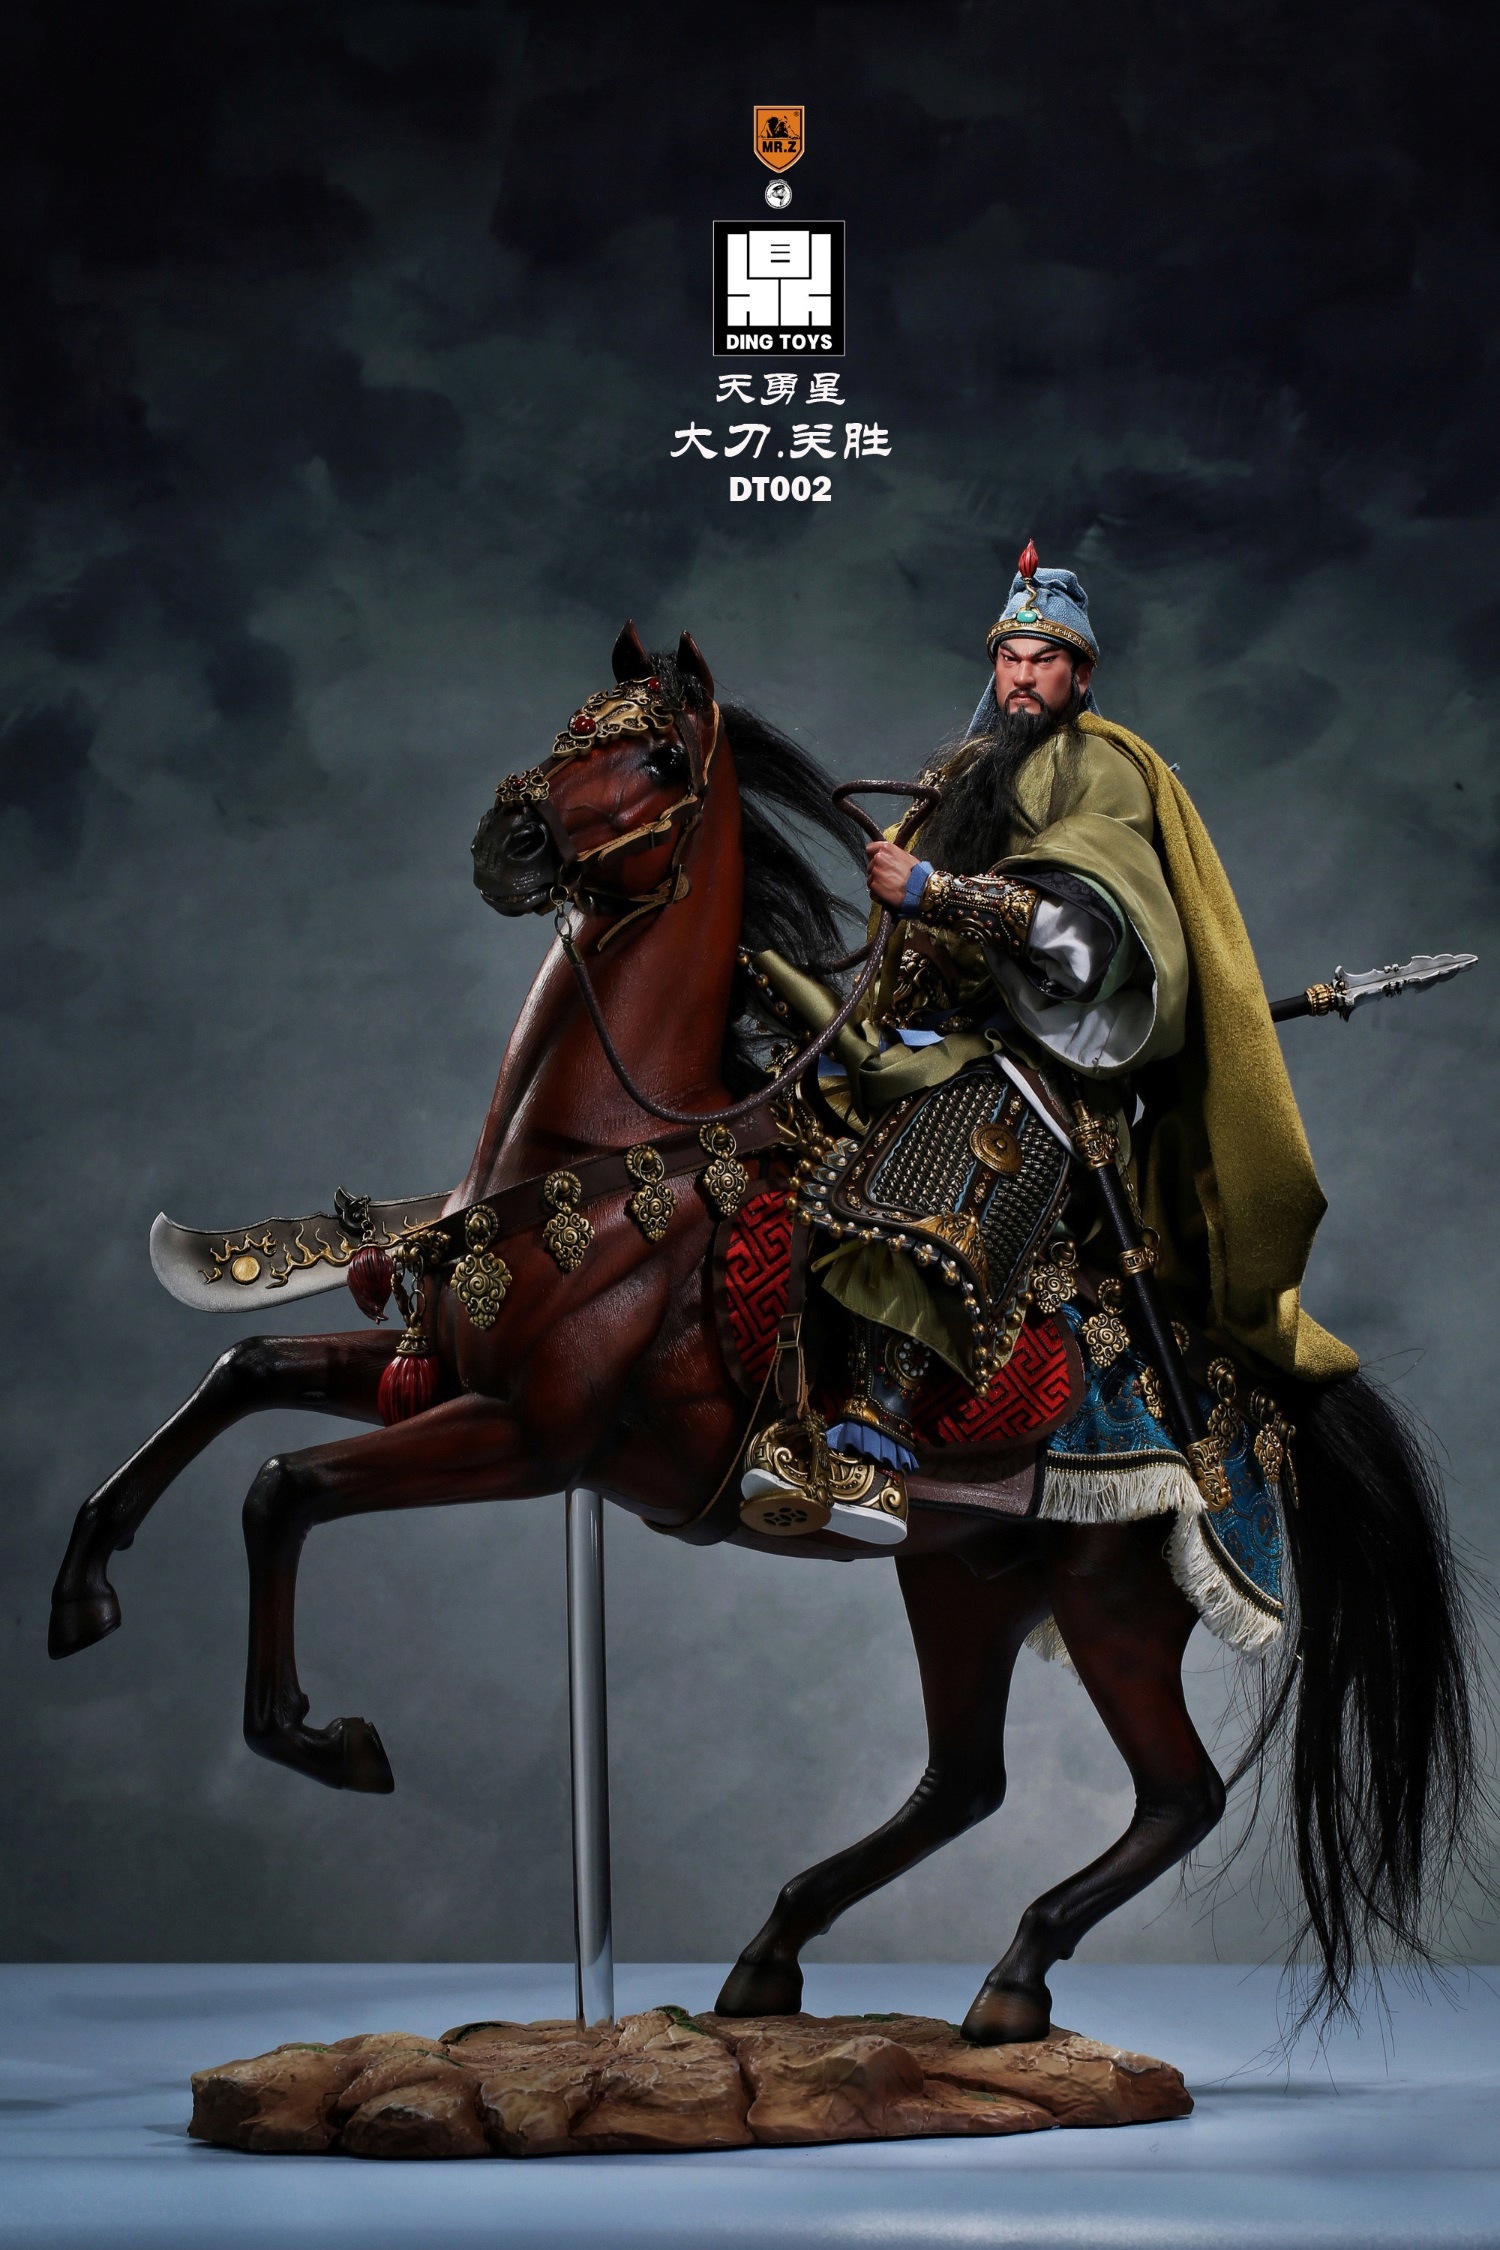 DingToys - NEW PRODUCT: Mr.Z x Ding Toys DT002 1/6 Scale 《Water Margin》Guan Sheng, War Horse 08153